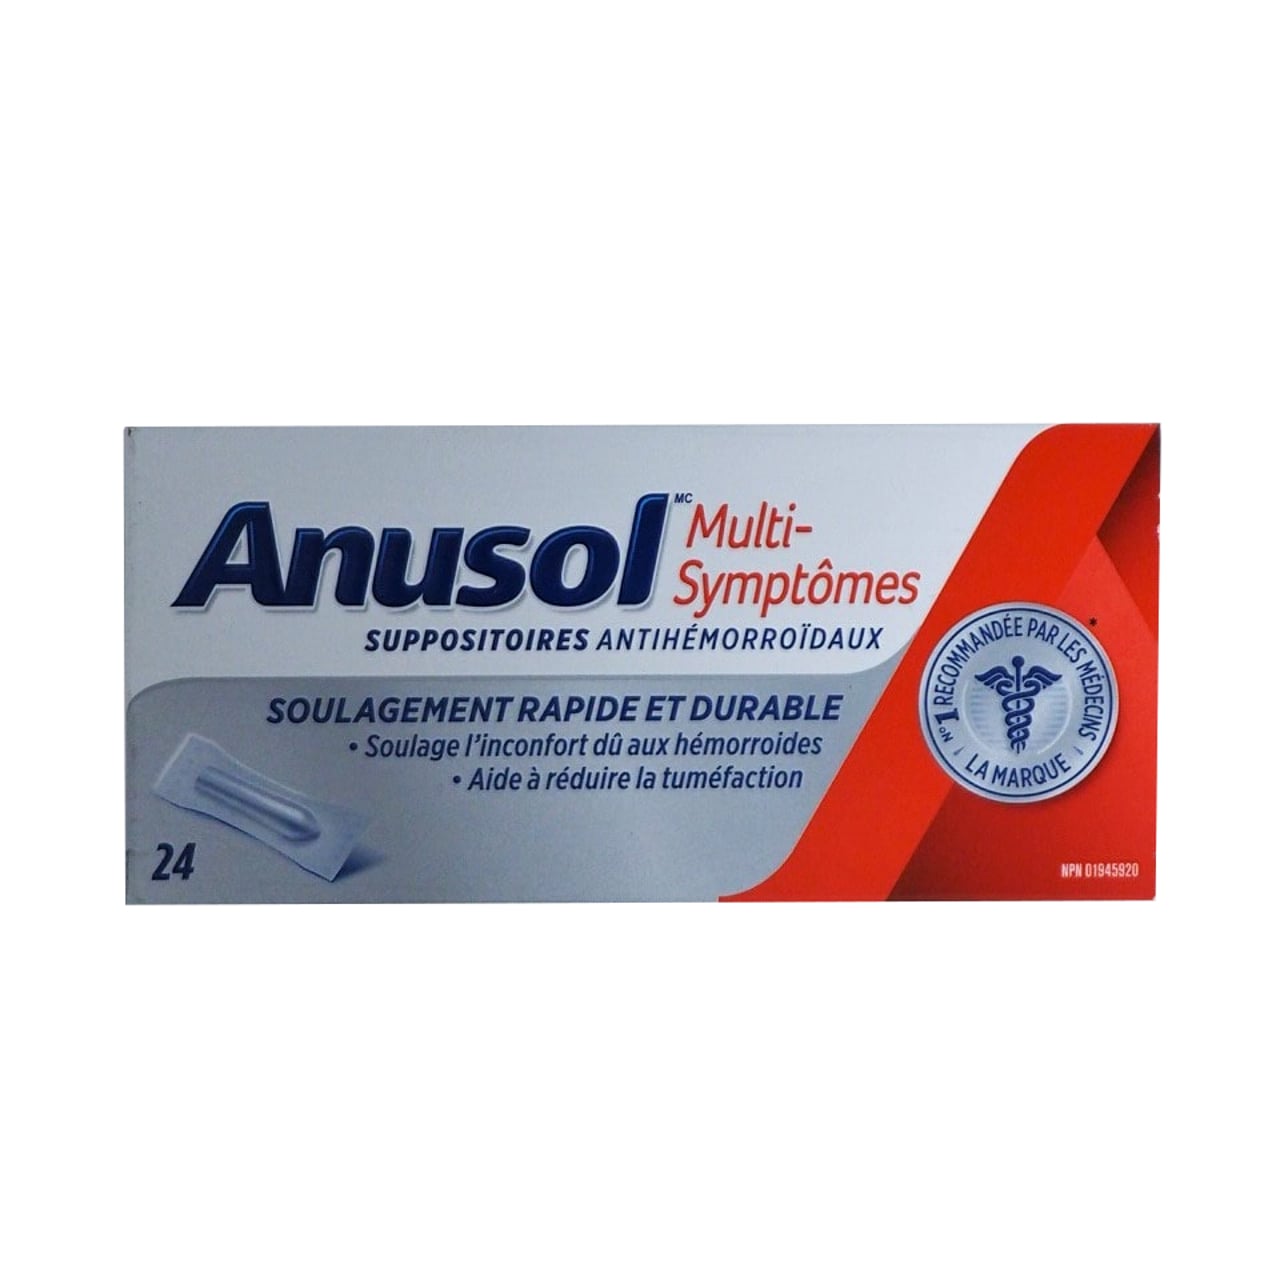 Product package for Anusol Multi-Symptom Hemorrhoidal Suppositories in French